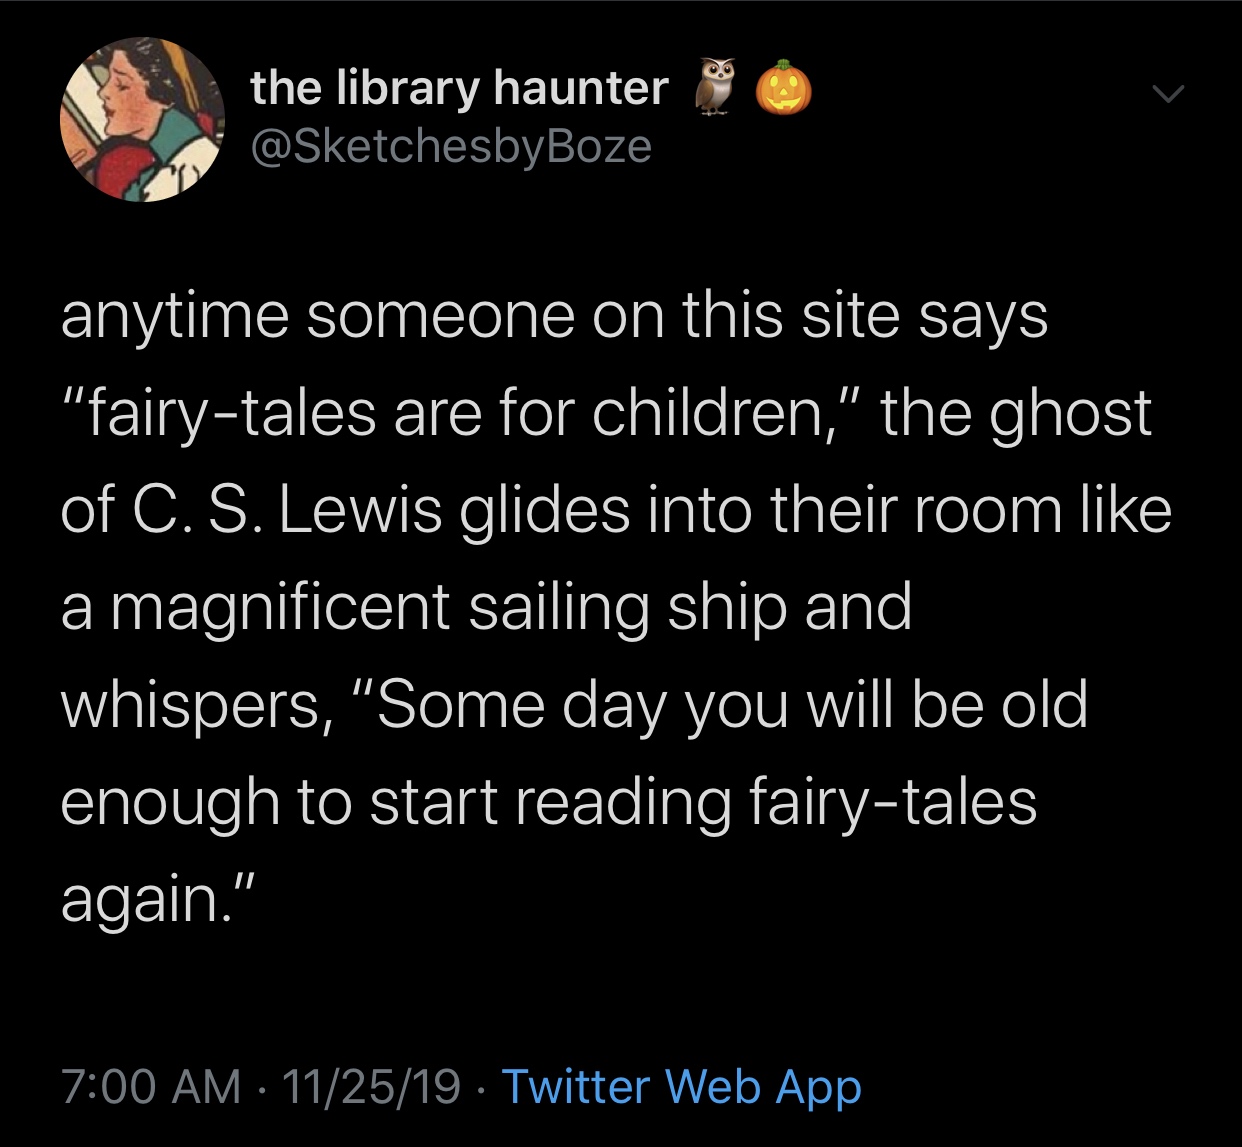 meme - the library haunter anytime someone on this site says "fairytales are for children," the ghost of C. S. Lewis glides into their room a magnificent sailing ship and whispers, "Some day you will be old enough to start reading fairytales again." 11251